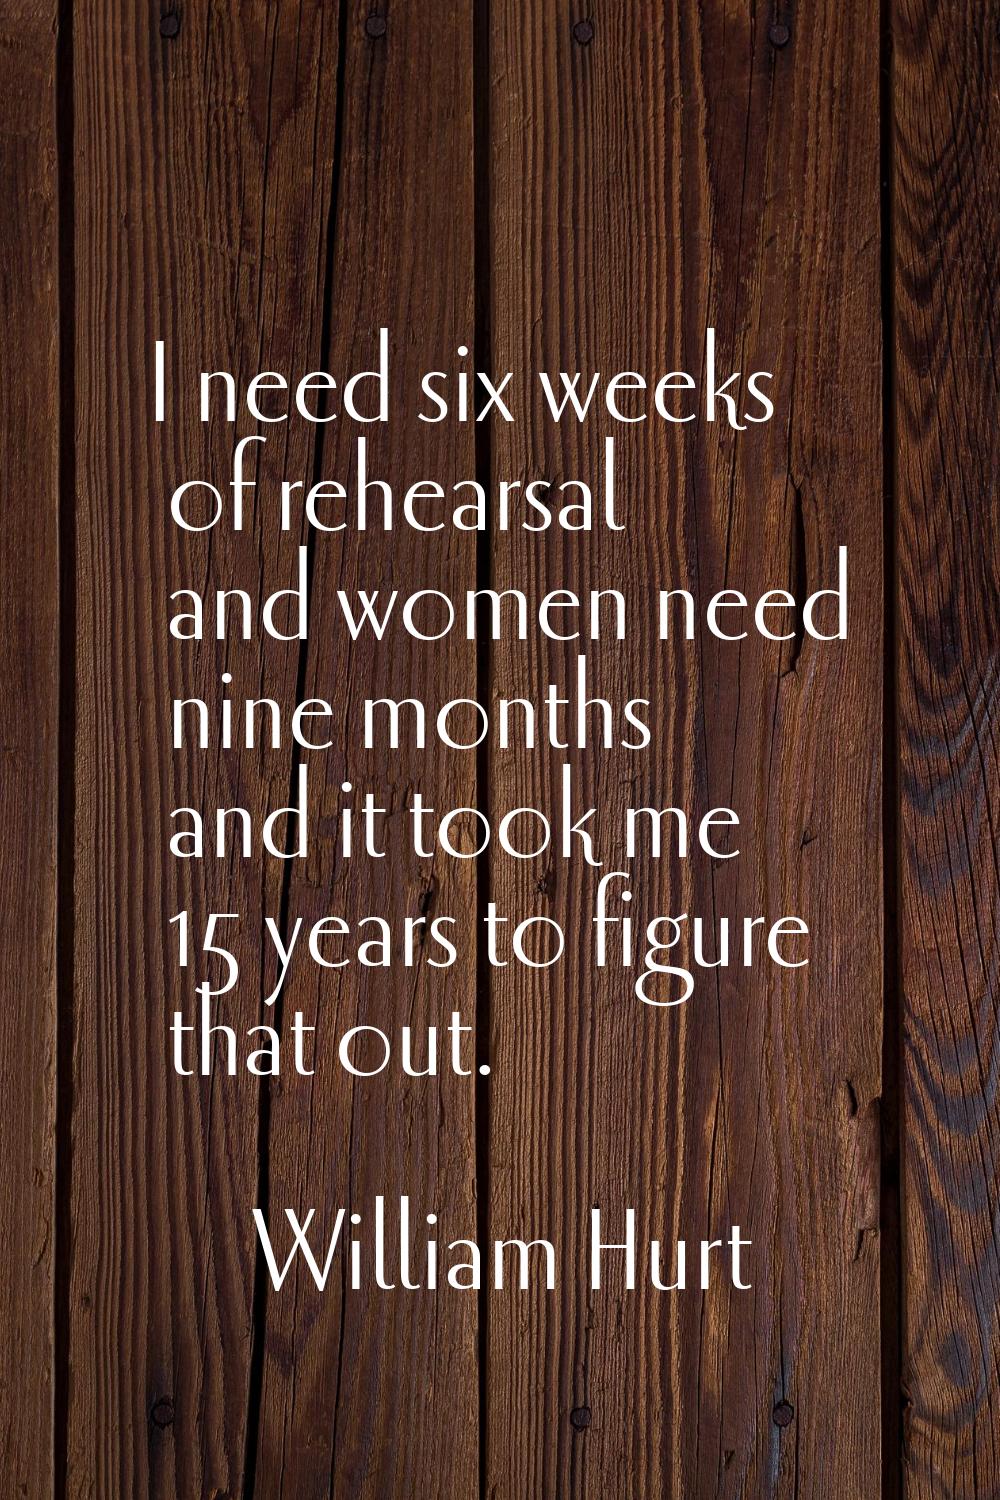 I need six weeks of rehearsal and women need nine months and it took me 15 years to figure that out